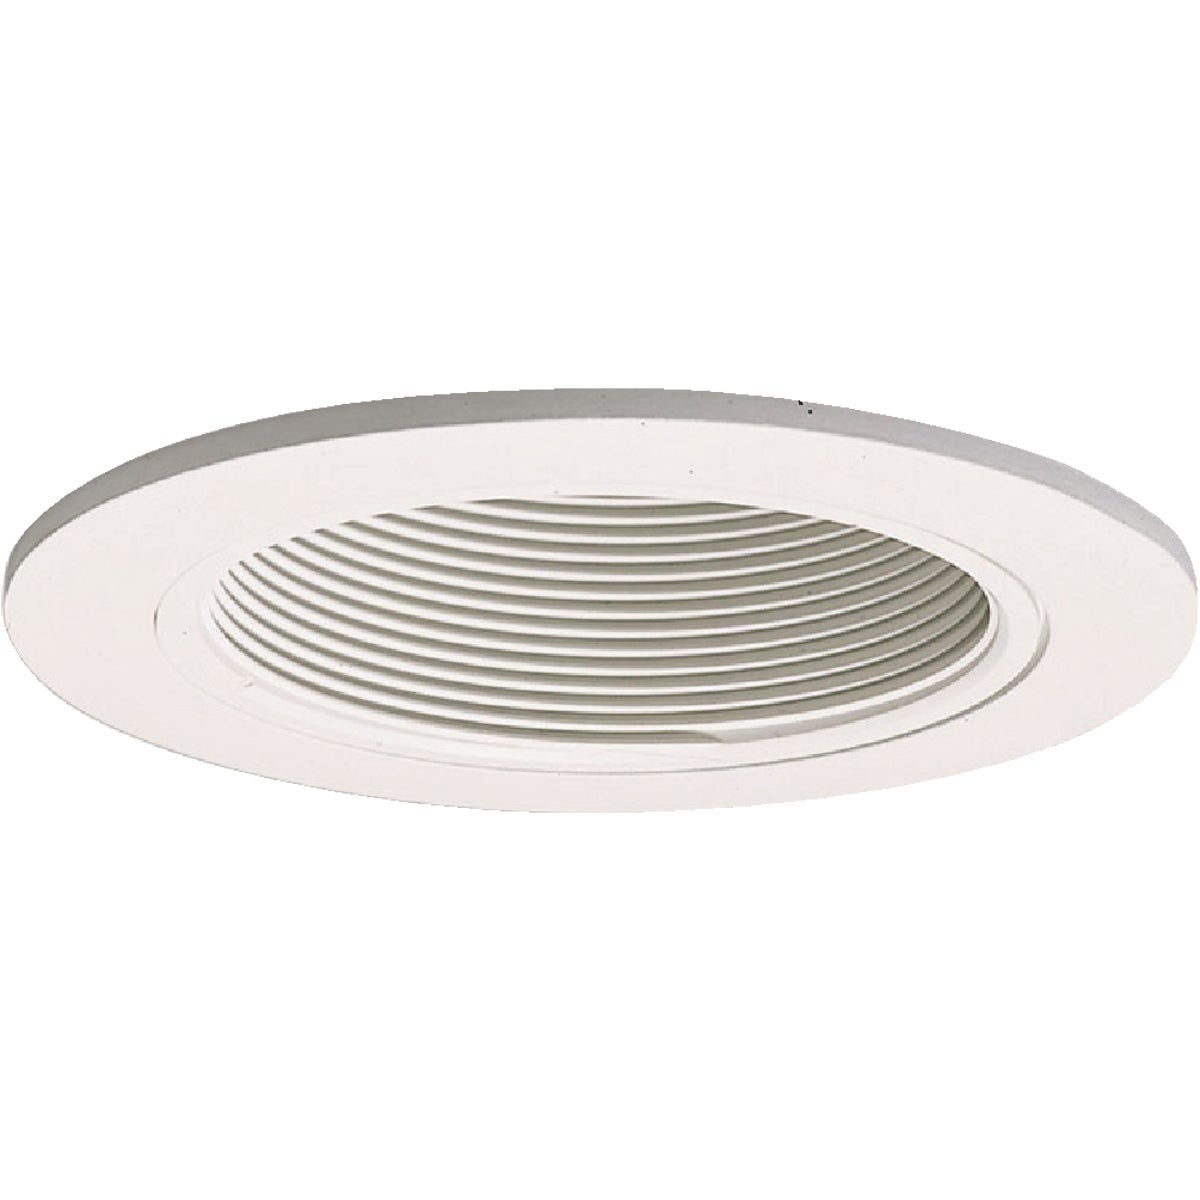 Item 525243, 4 inch baffle and trim for use with recessed fixtures.